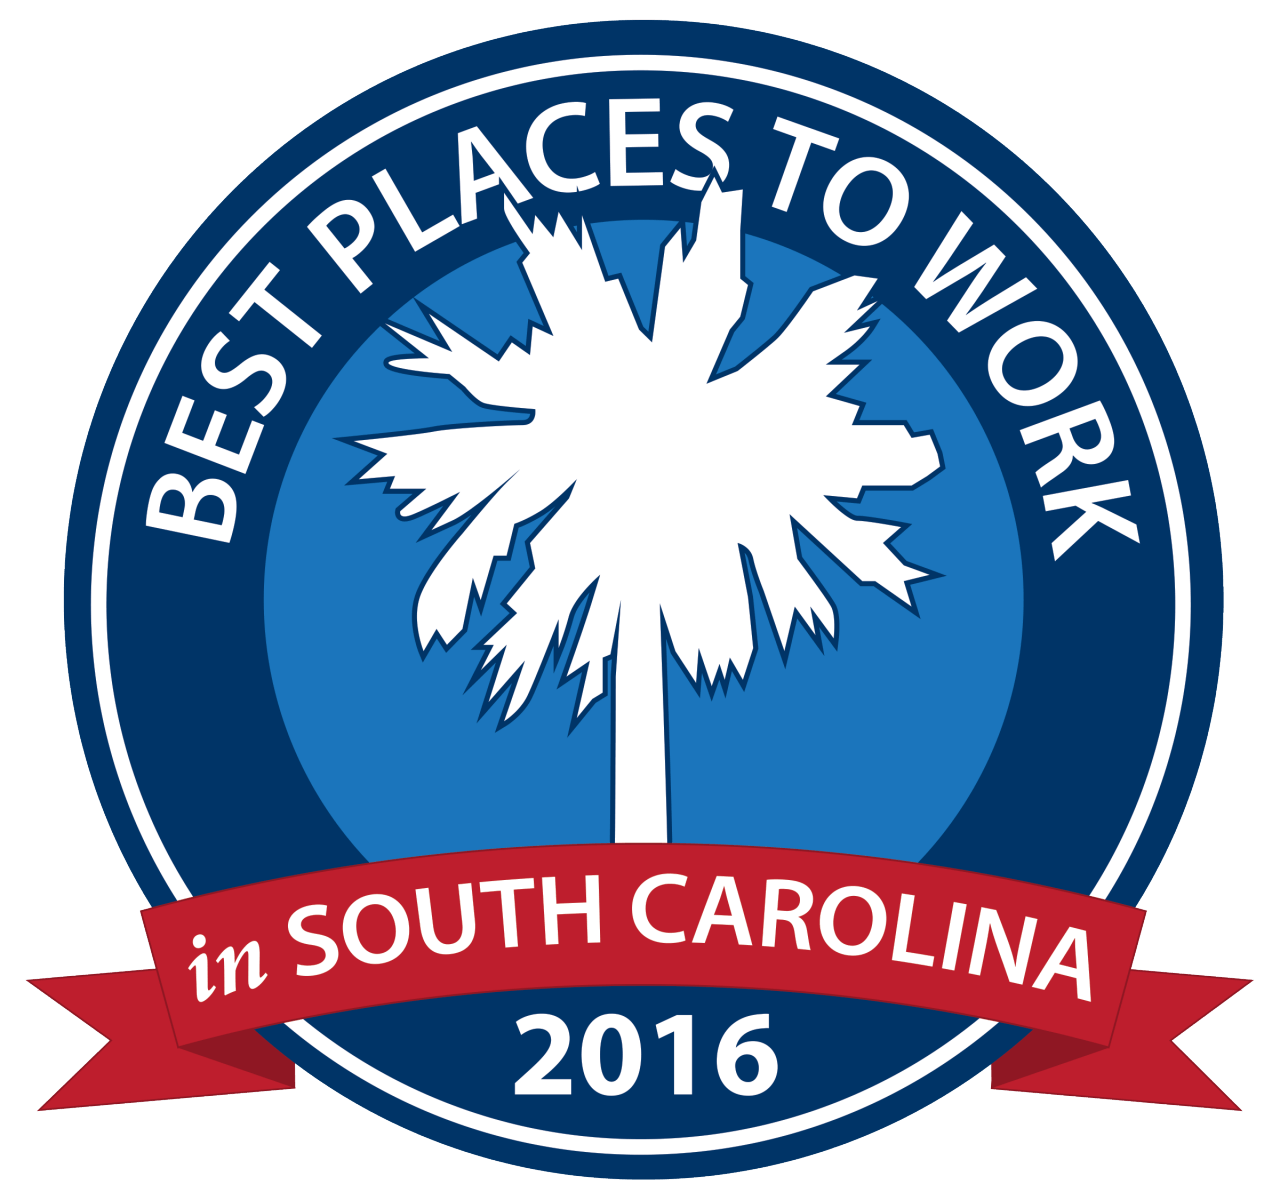 Best Places to Work in South Carolina 2016